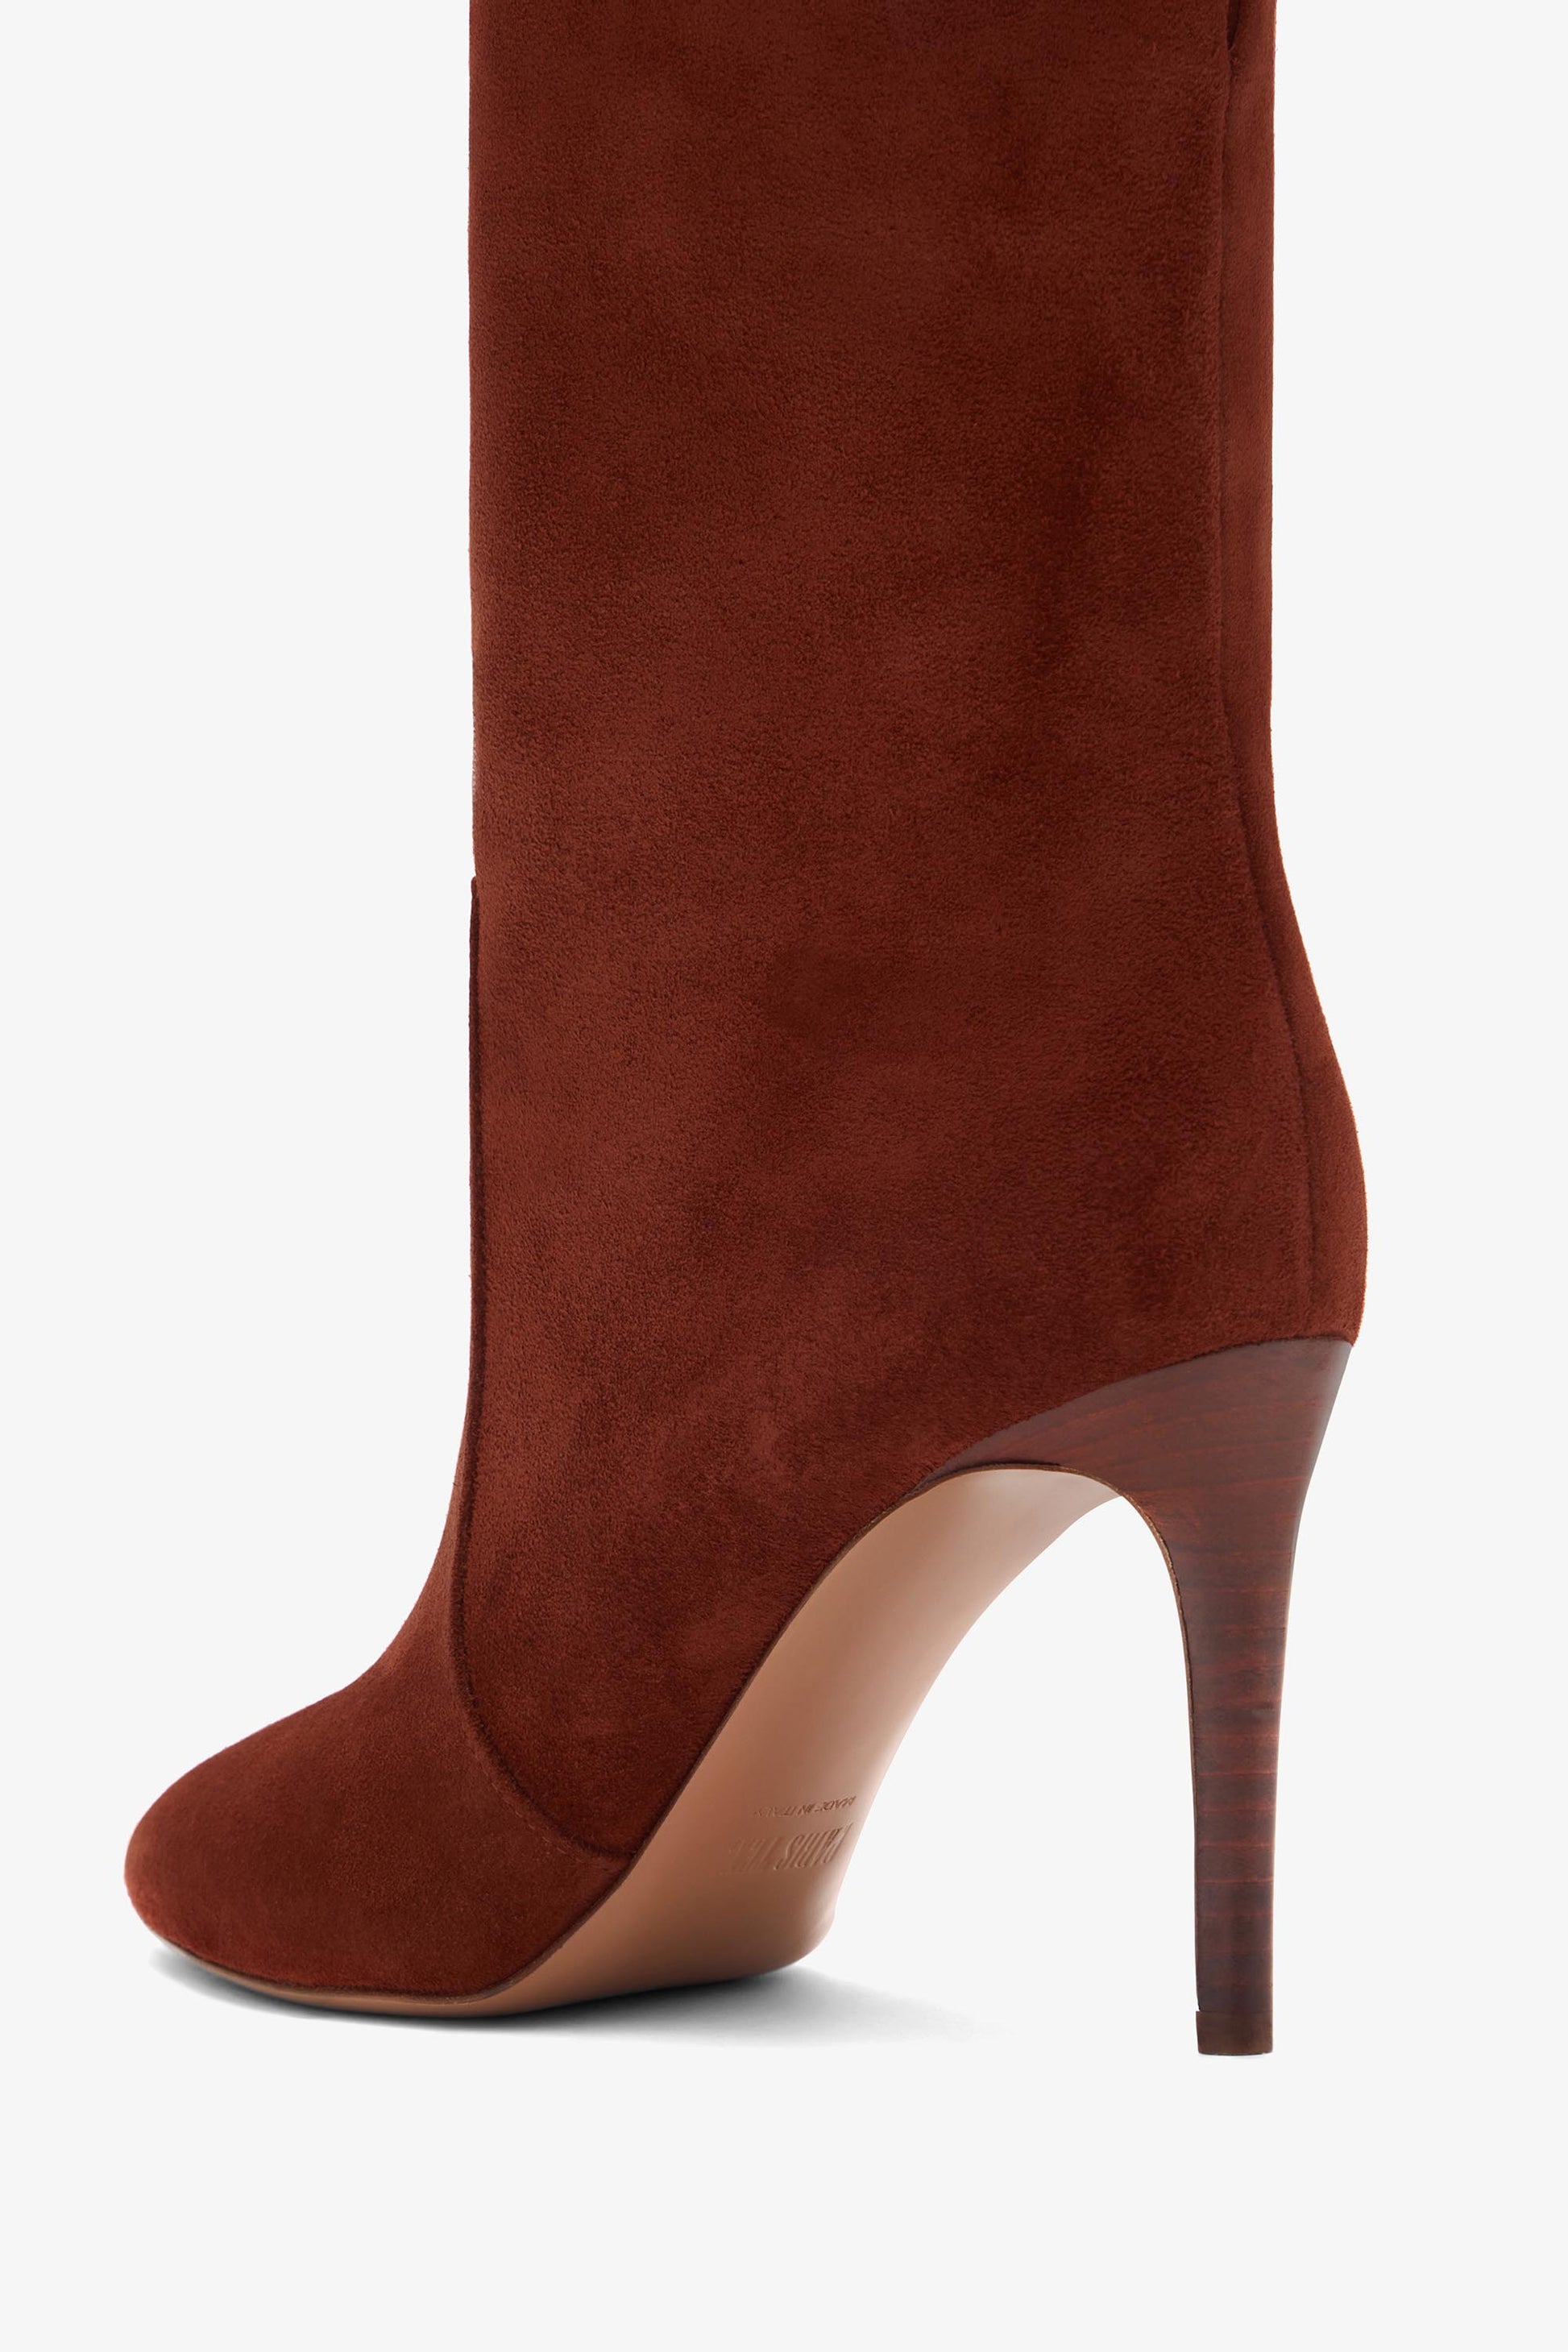 Rust suede ankle boot